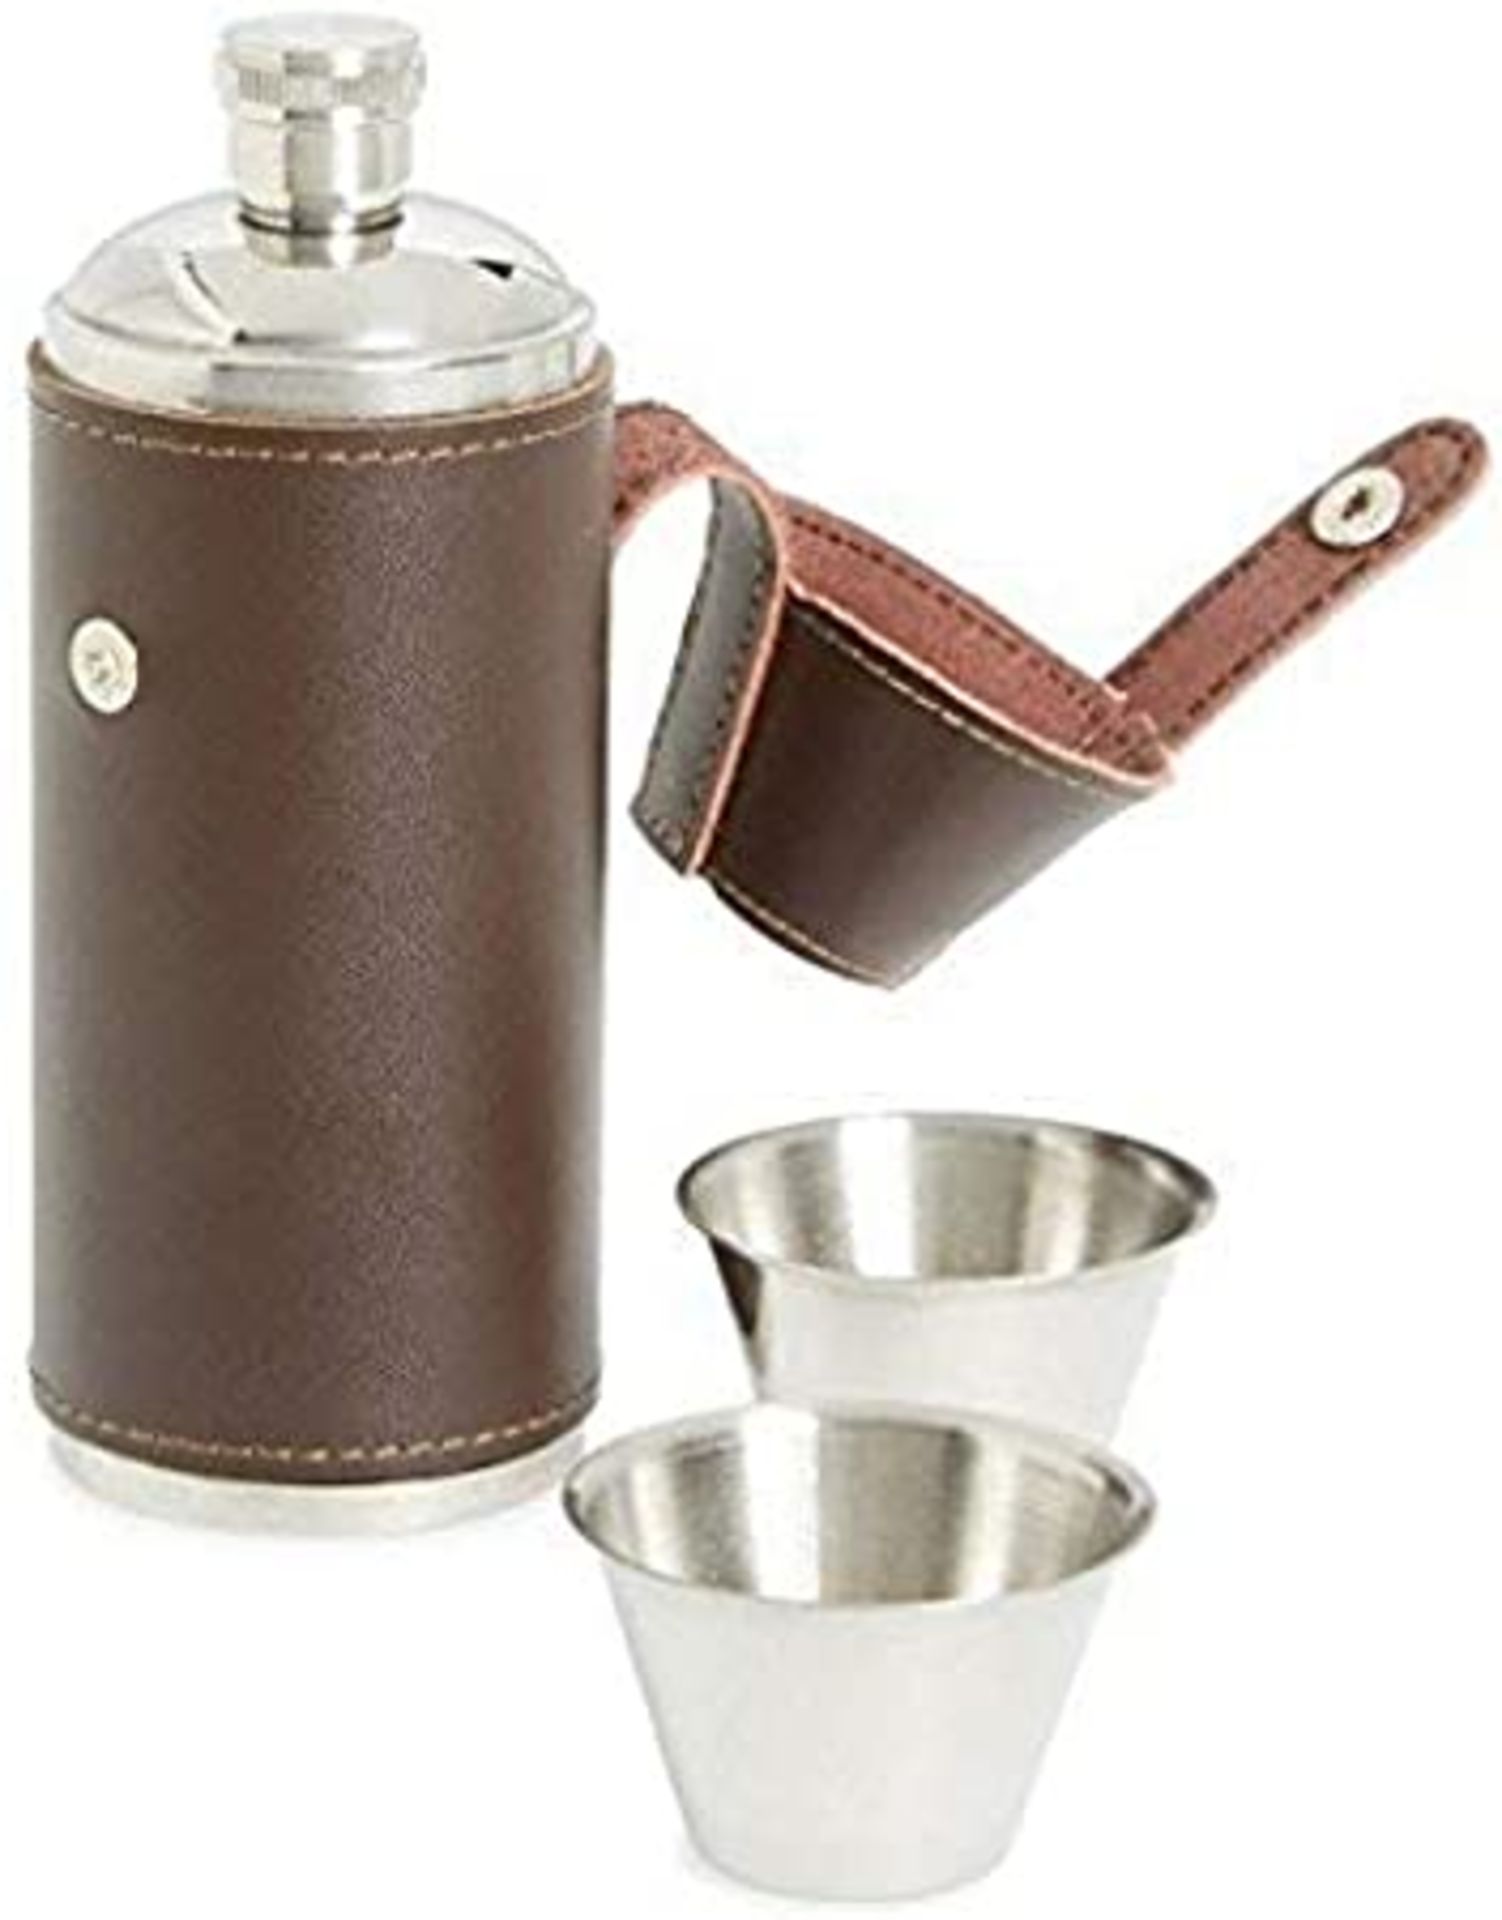 2 x Kikkerland 8oz Leather Clad Camping Flask Sets With Drinking Shot Cups - New Stock - RRP £60